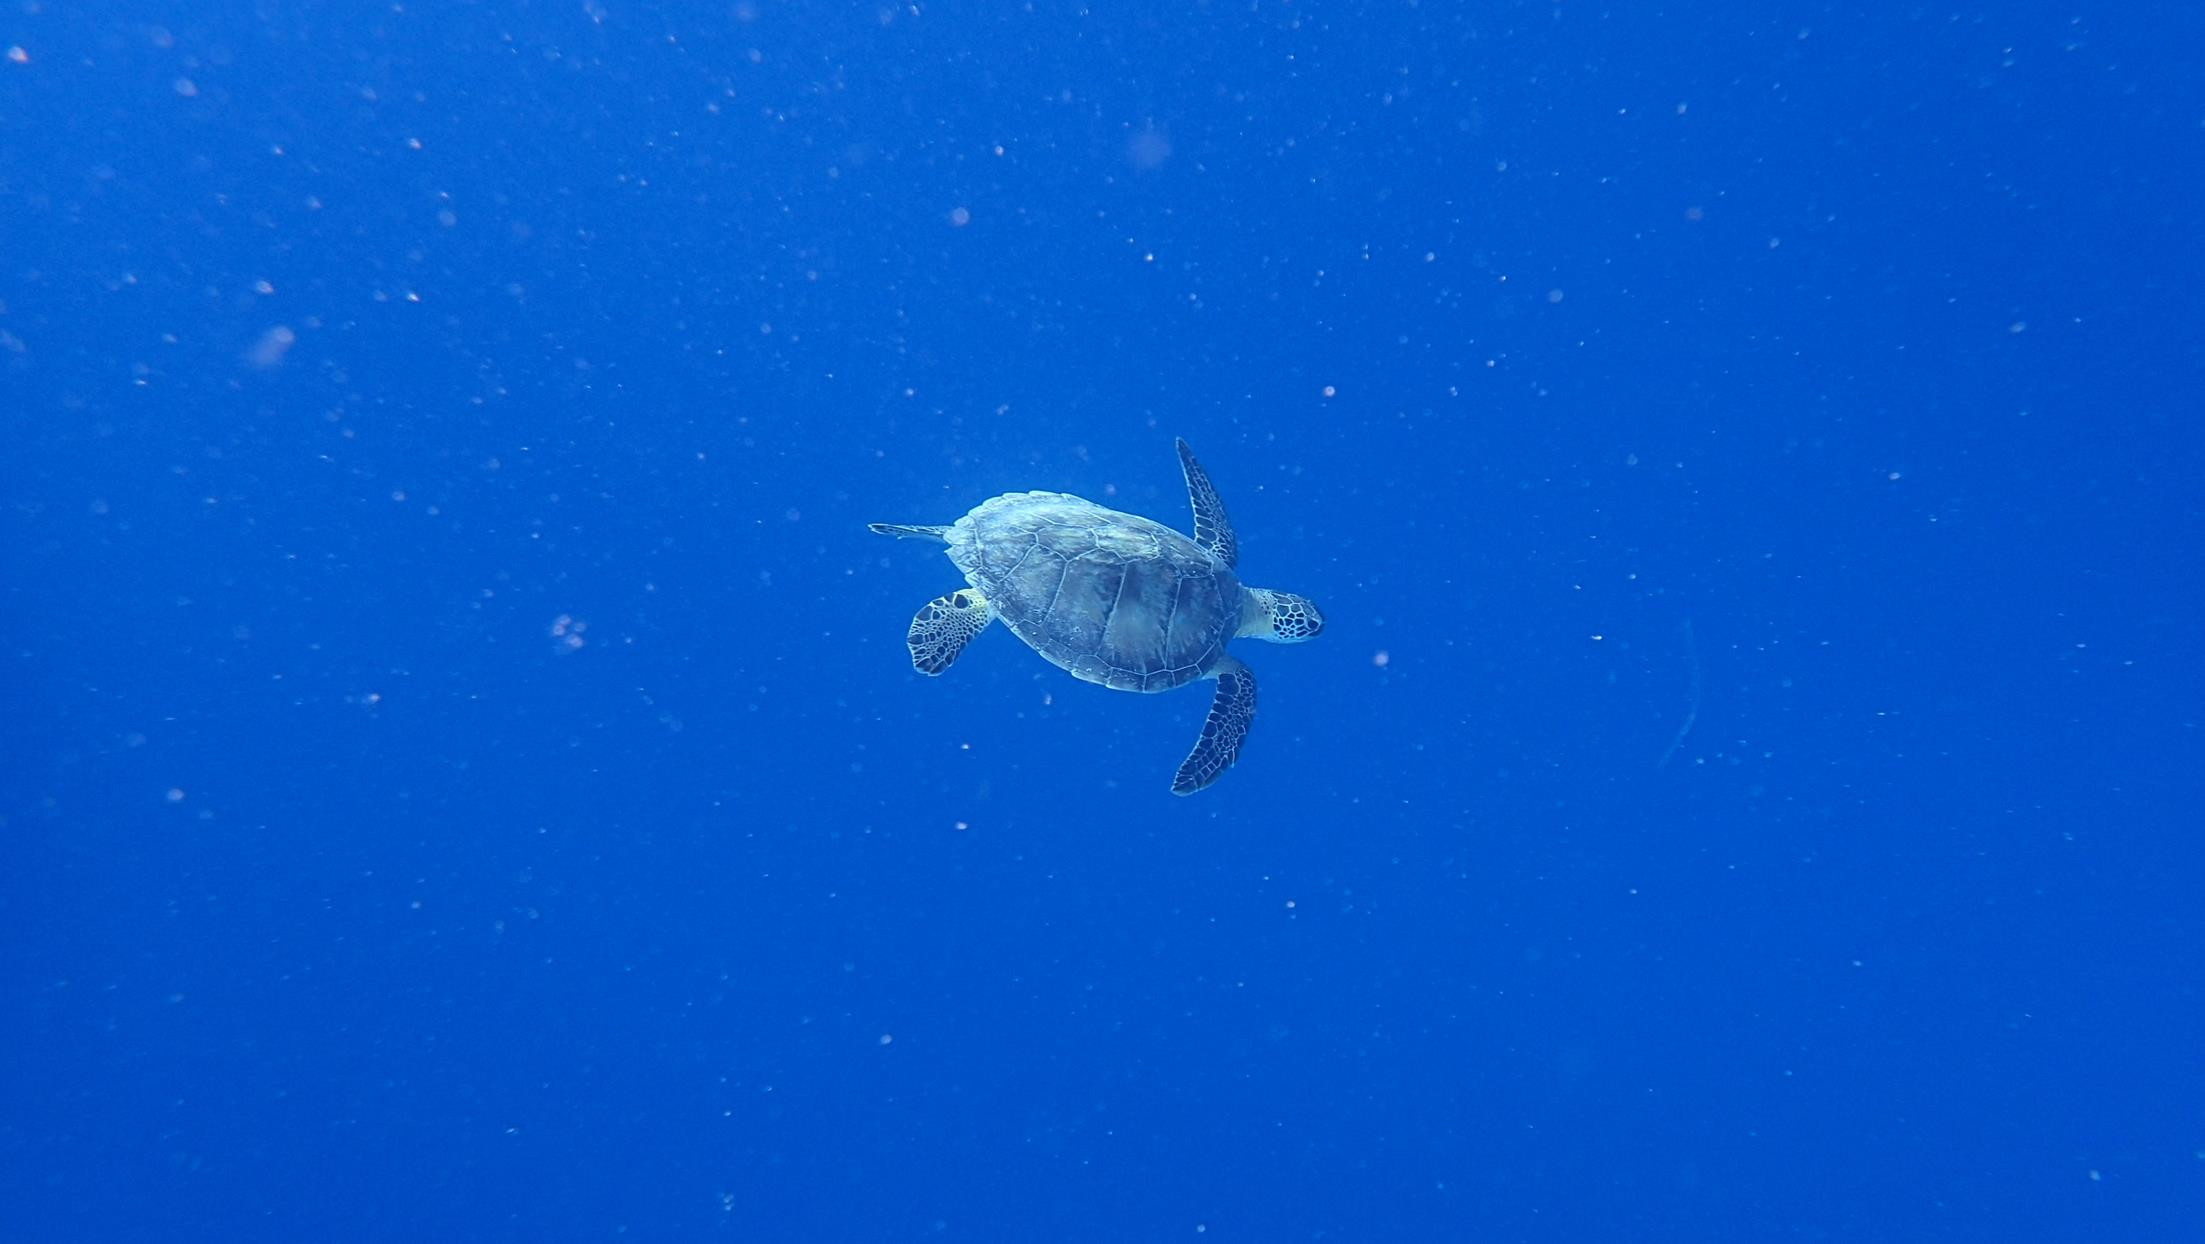 Swimming with this hawksbill turtle was a special way to end a great week at Abu Dabbab